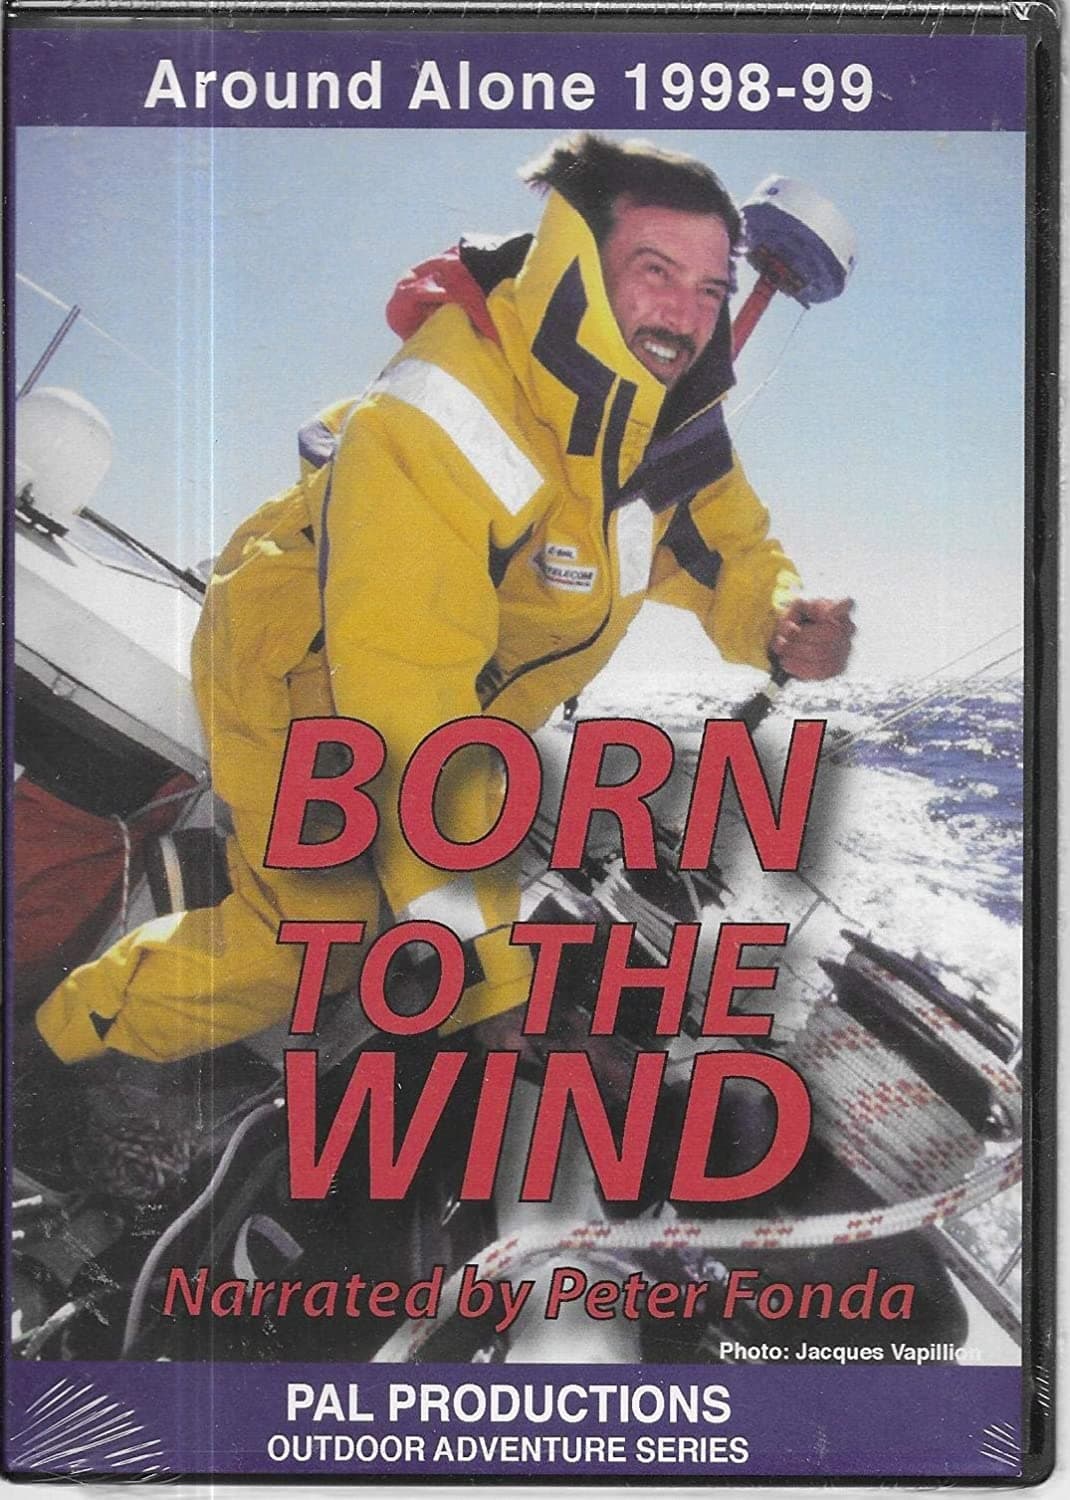 Born to the Wind